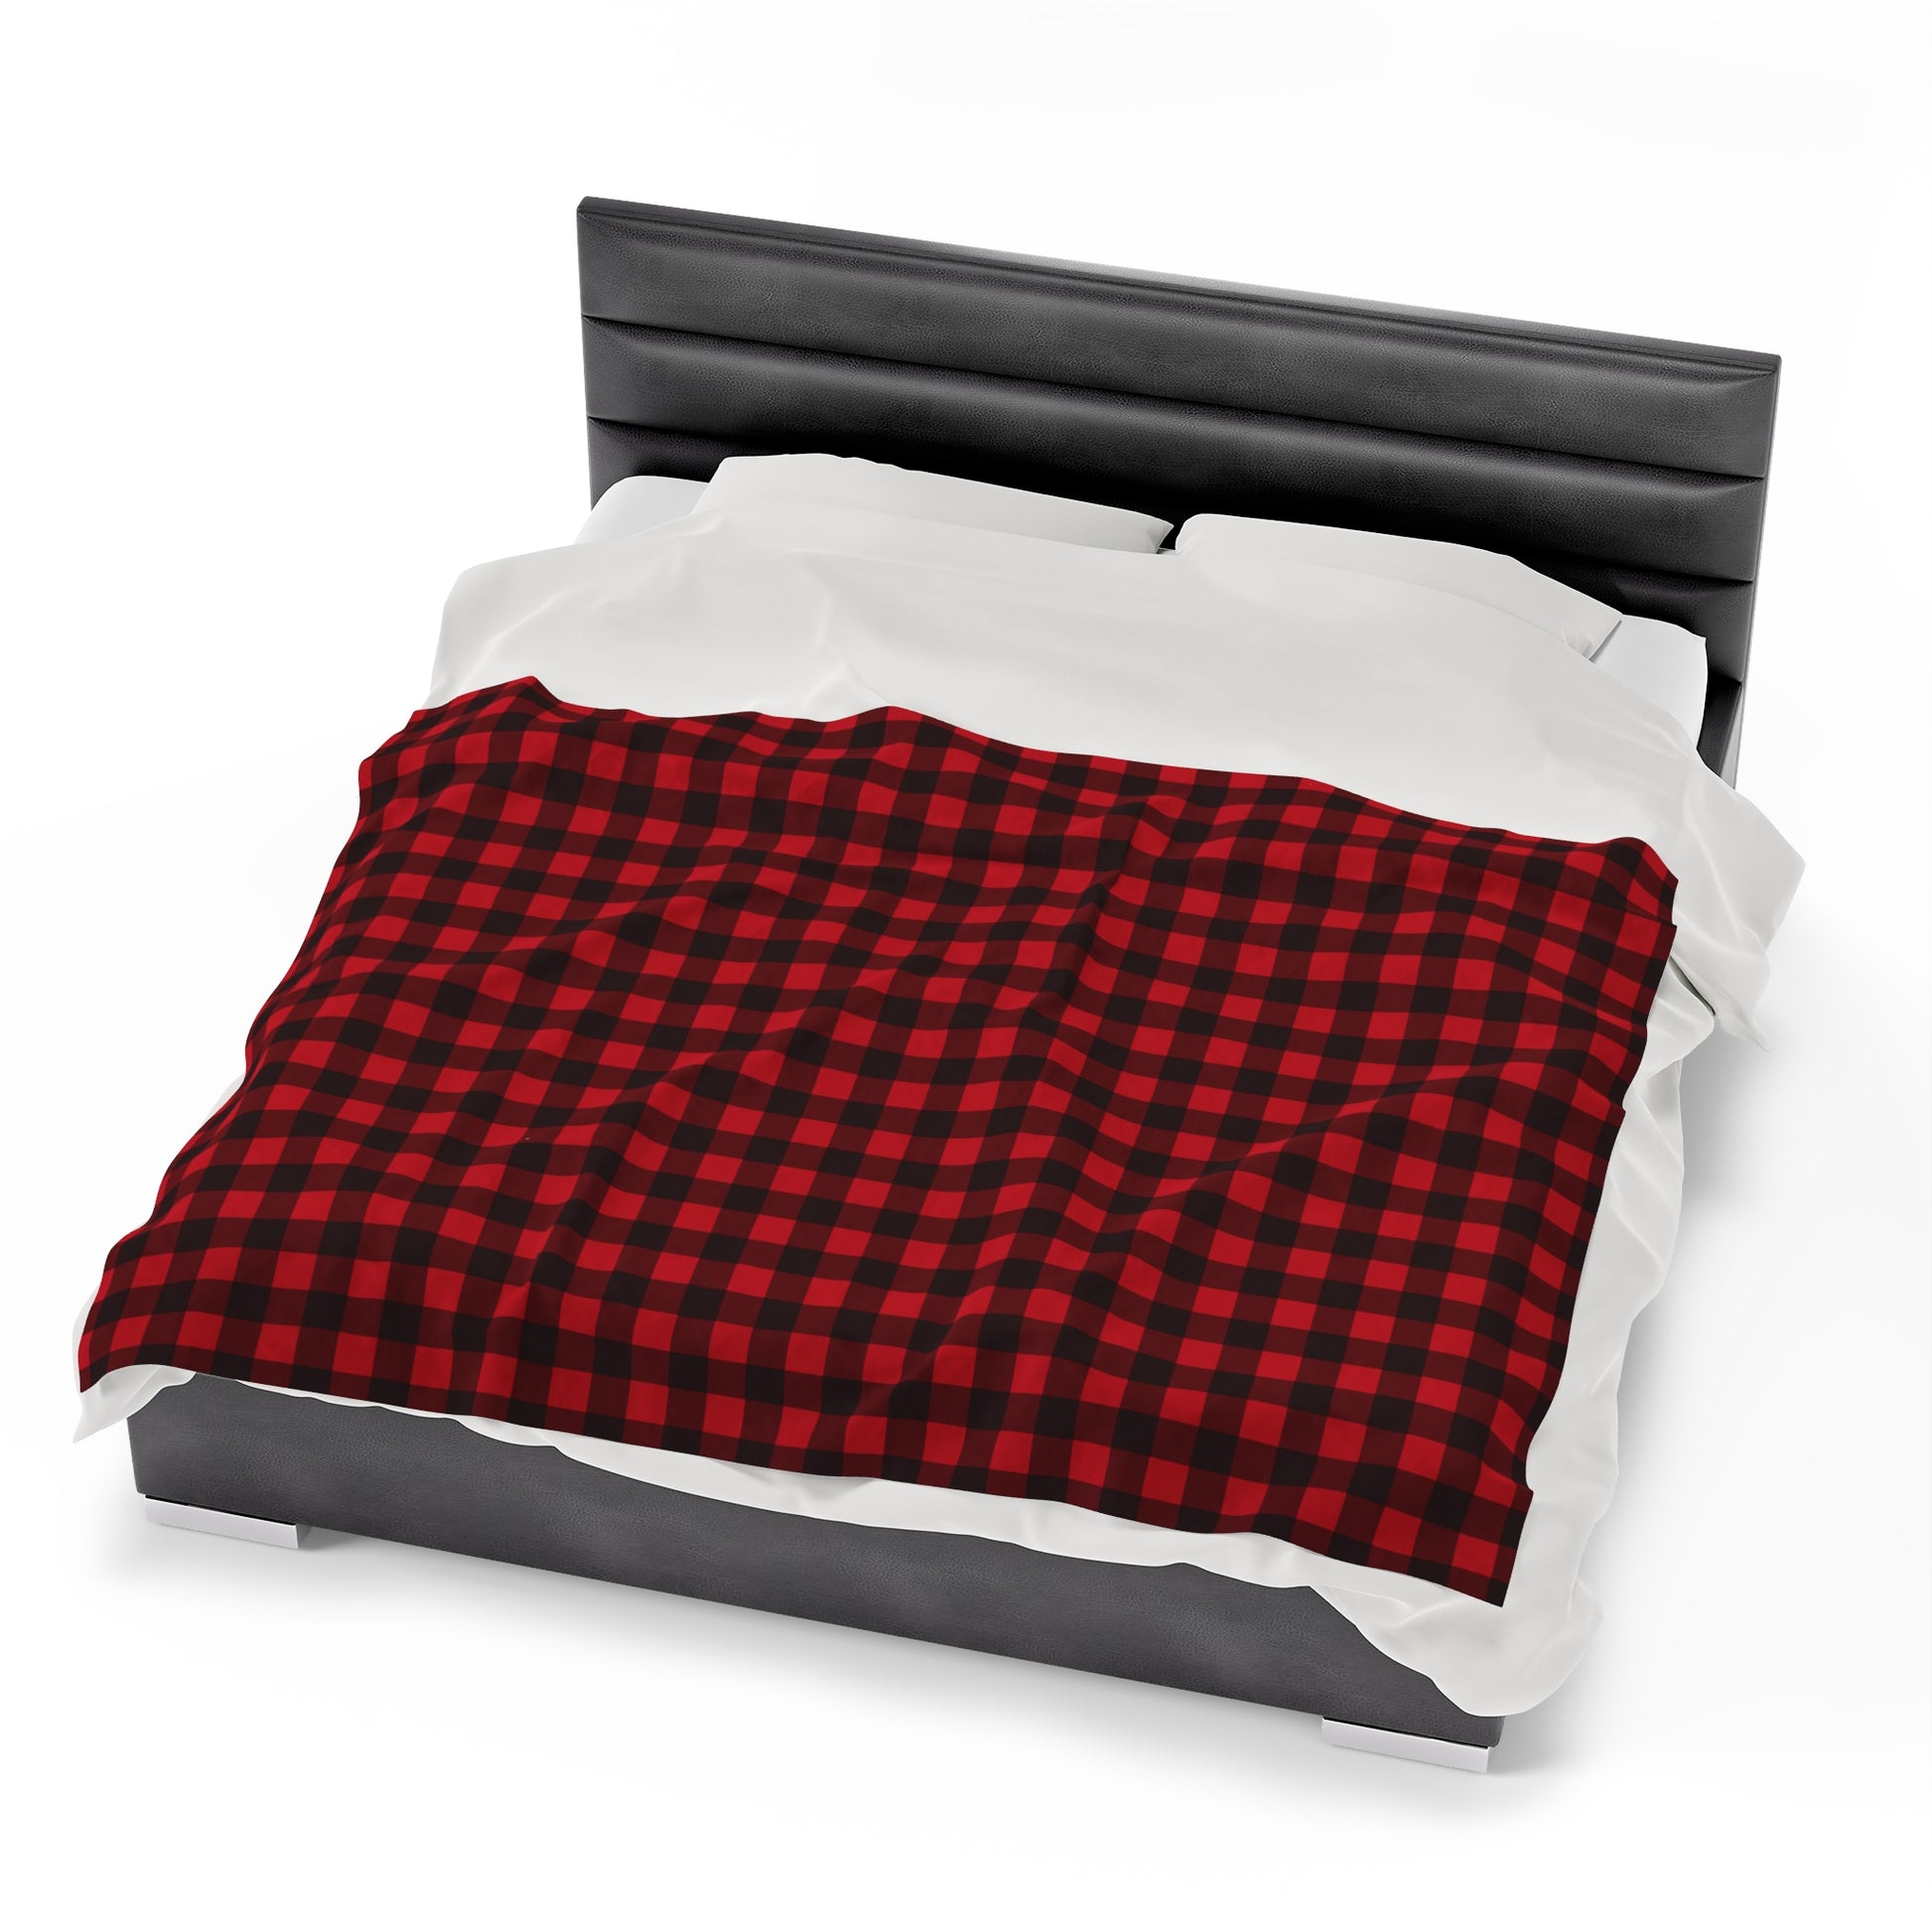 Red Buffalo Plaid Fleece Throw Blanket, Check Christmas Velveteen Soft Plush Fluffy Cozy Warm Adult Kids Small Large Sofa Bed Décor Starcove Fashion